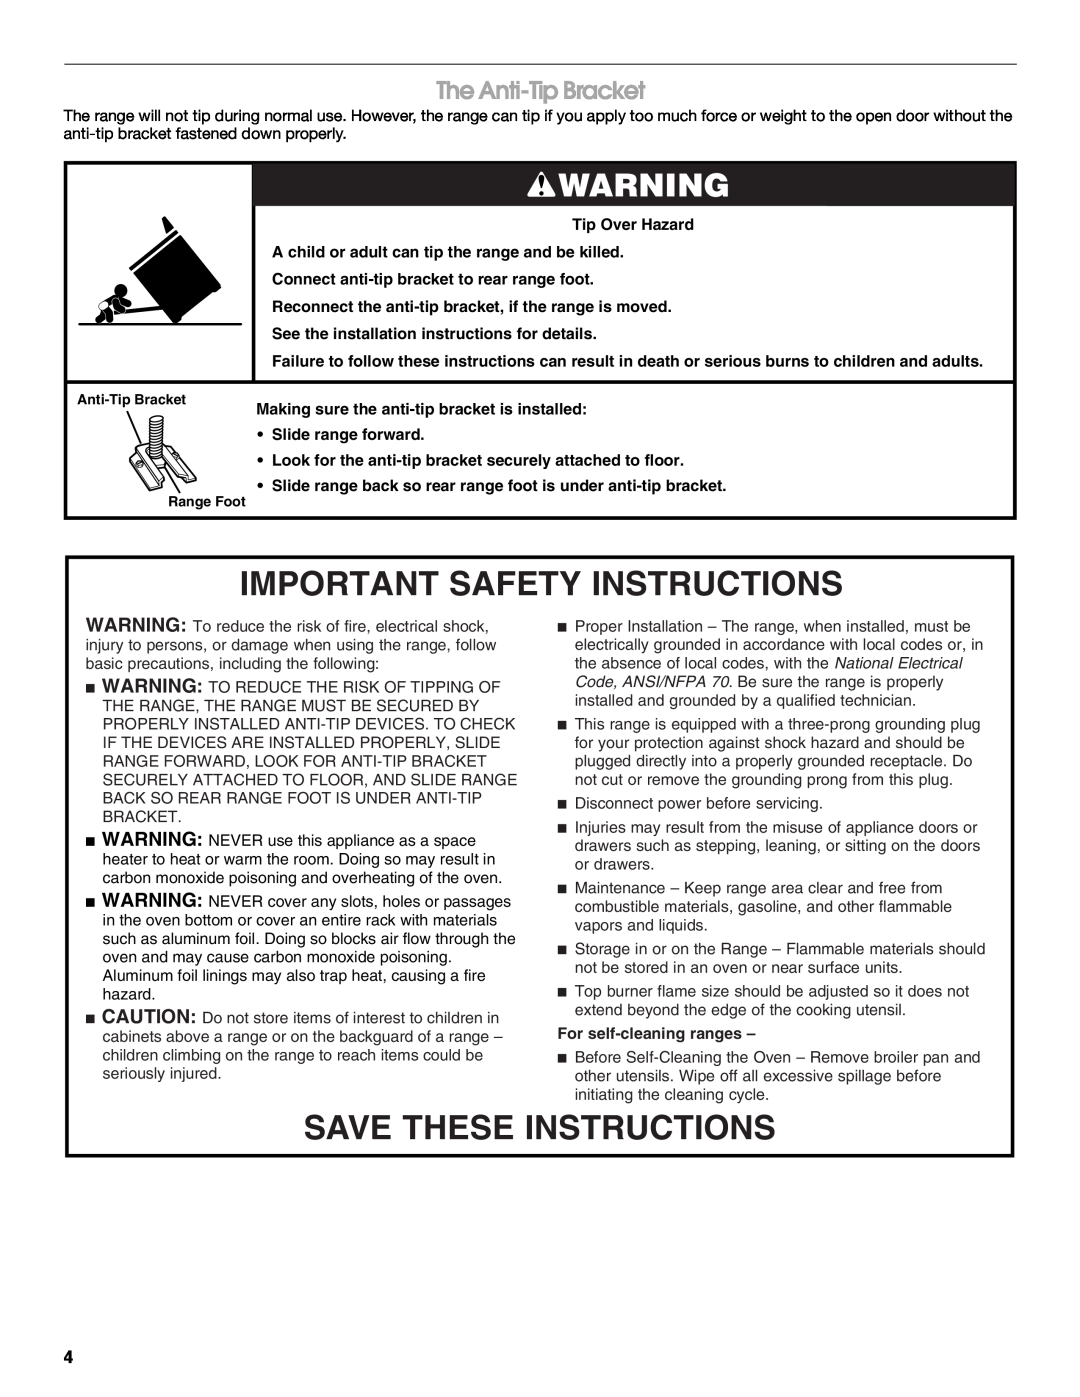 Estate W10173325A Important Safety Instructions, Save These Instructions, The Anti-Tip Bracket, For self-cleaning ranges 